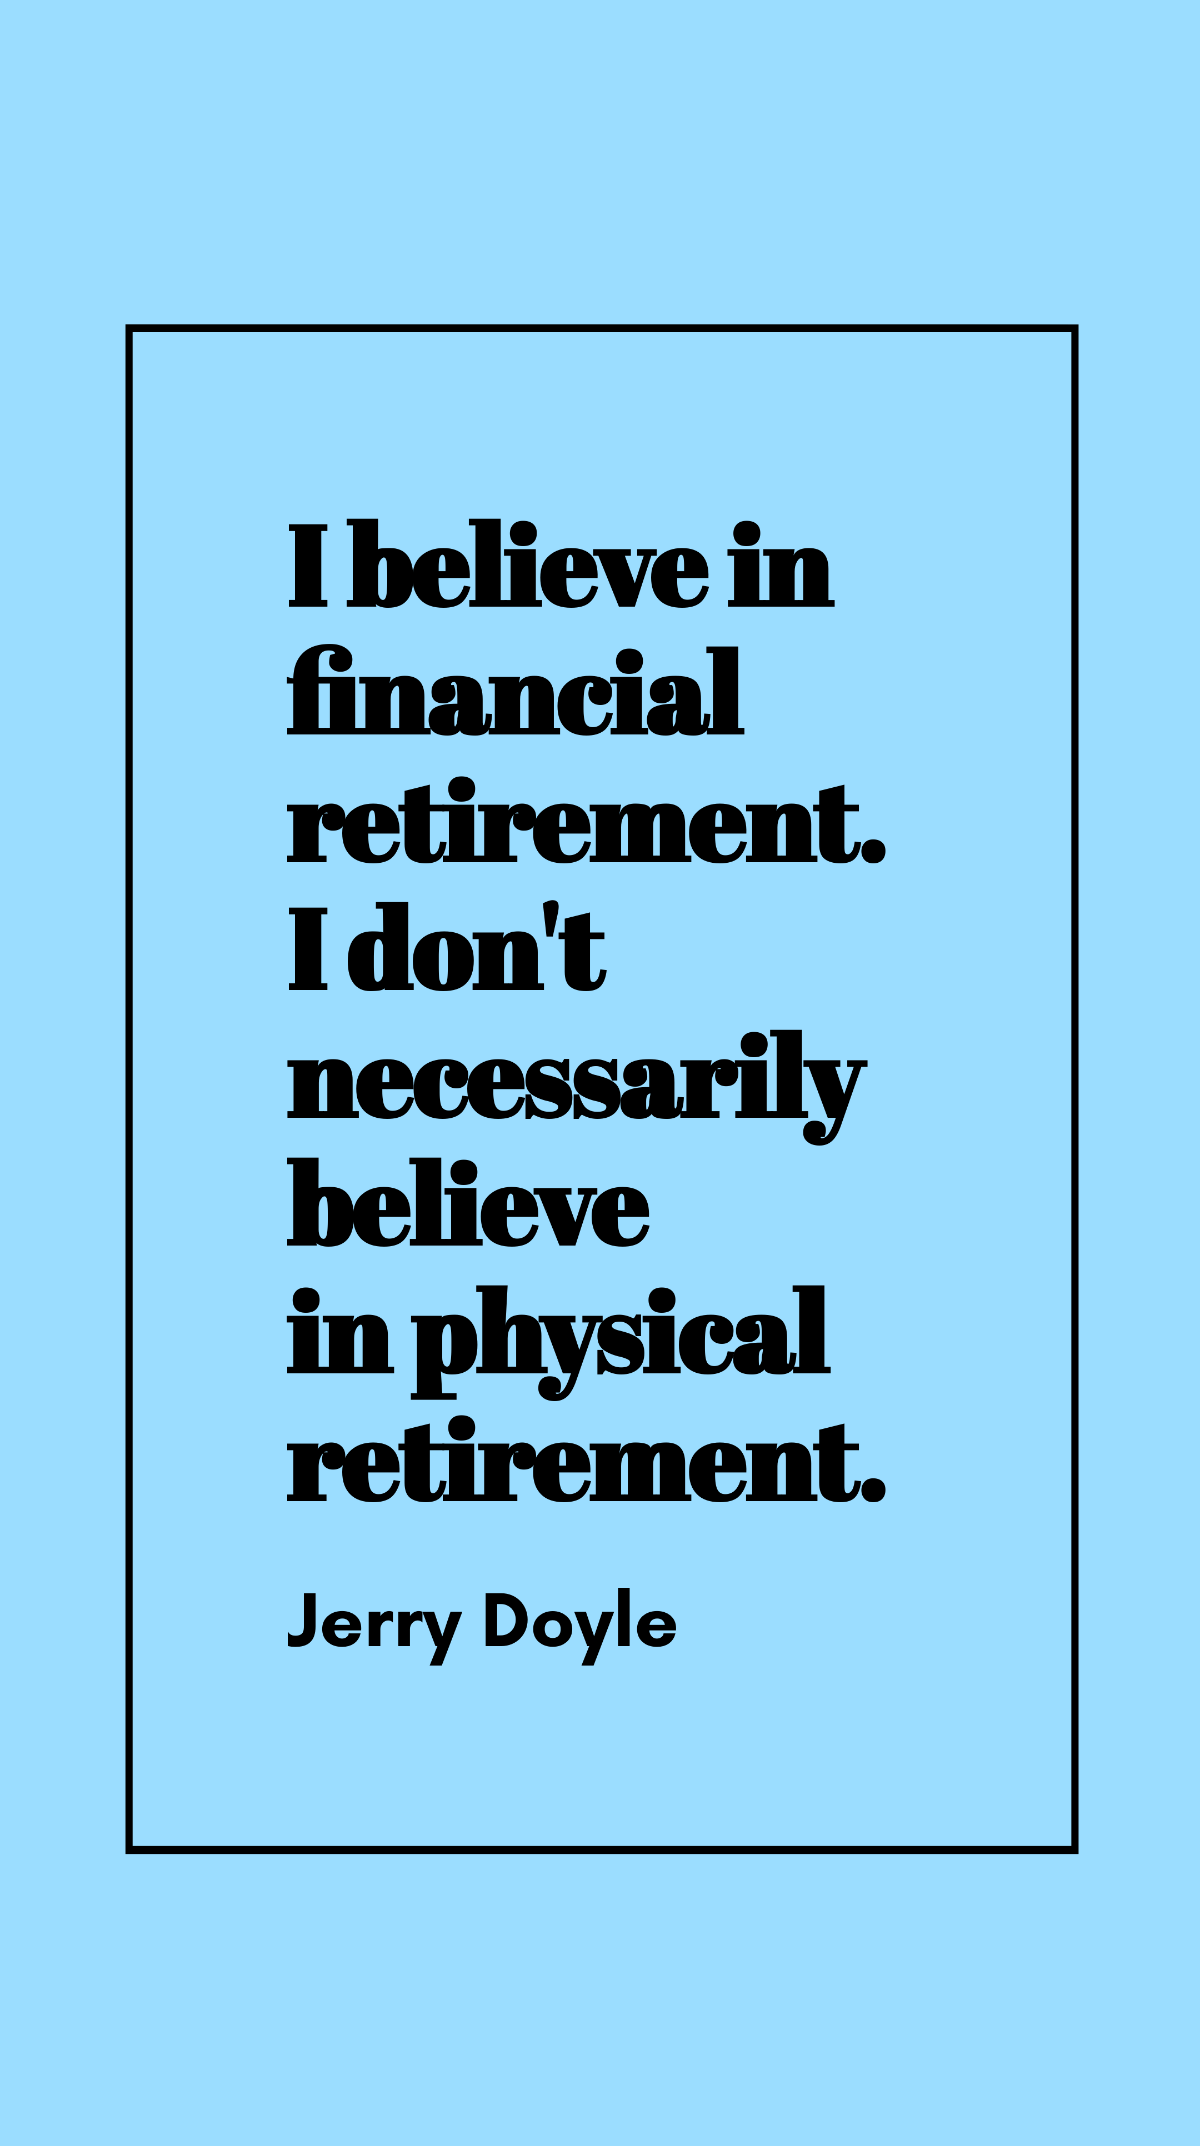 Jerry Doyle - I believe in financial retirement. I don't necessarily believe in physical retirement. Template